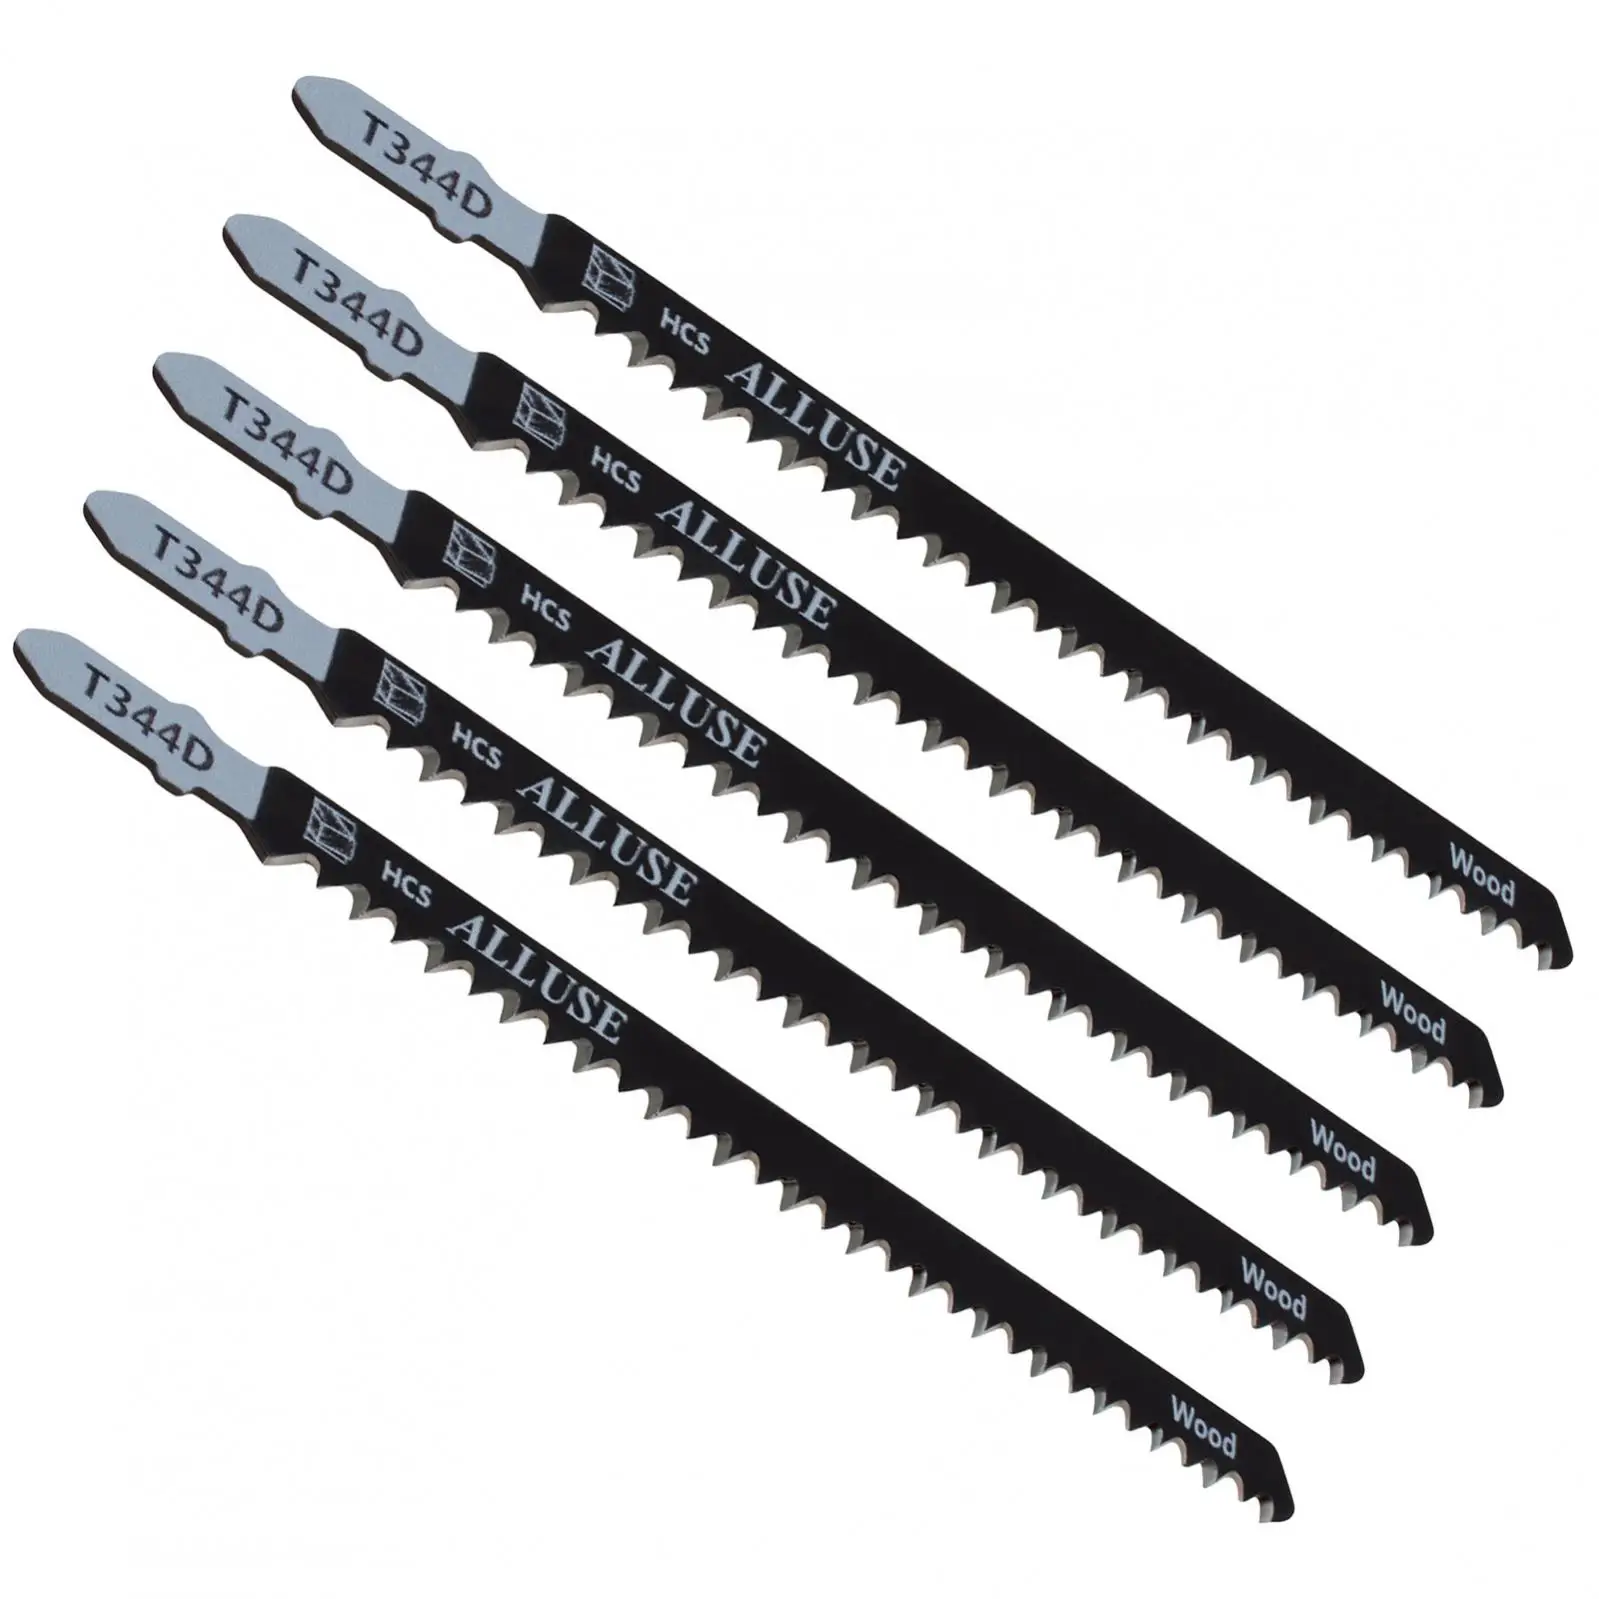 5pcs/set High-carbon Steel Reciprocating Saw Blades  T344D 150mm Straight Cutting Jig Saw for Woodworking Tools / Plastic PVC 5pcs reciprocating saw blades 150mm s922ef saber saw jigsaw carbon steel material cutter tool for metal pipe cutting